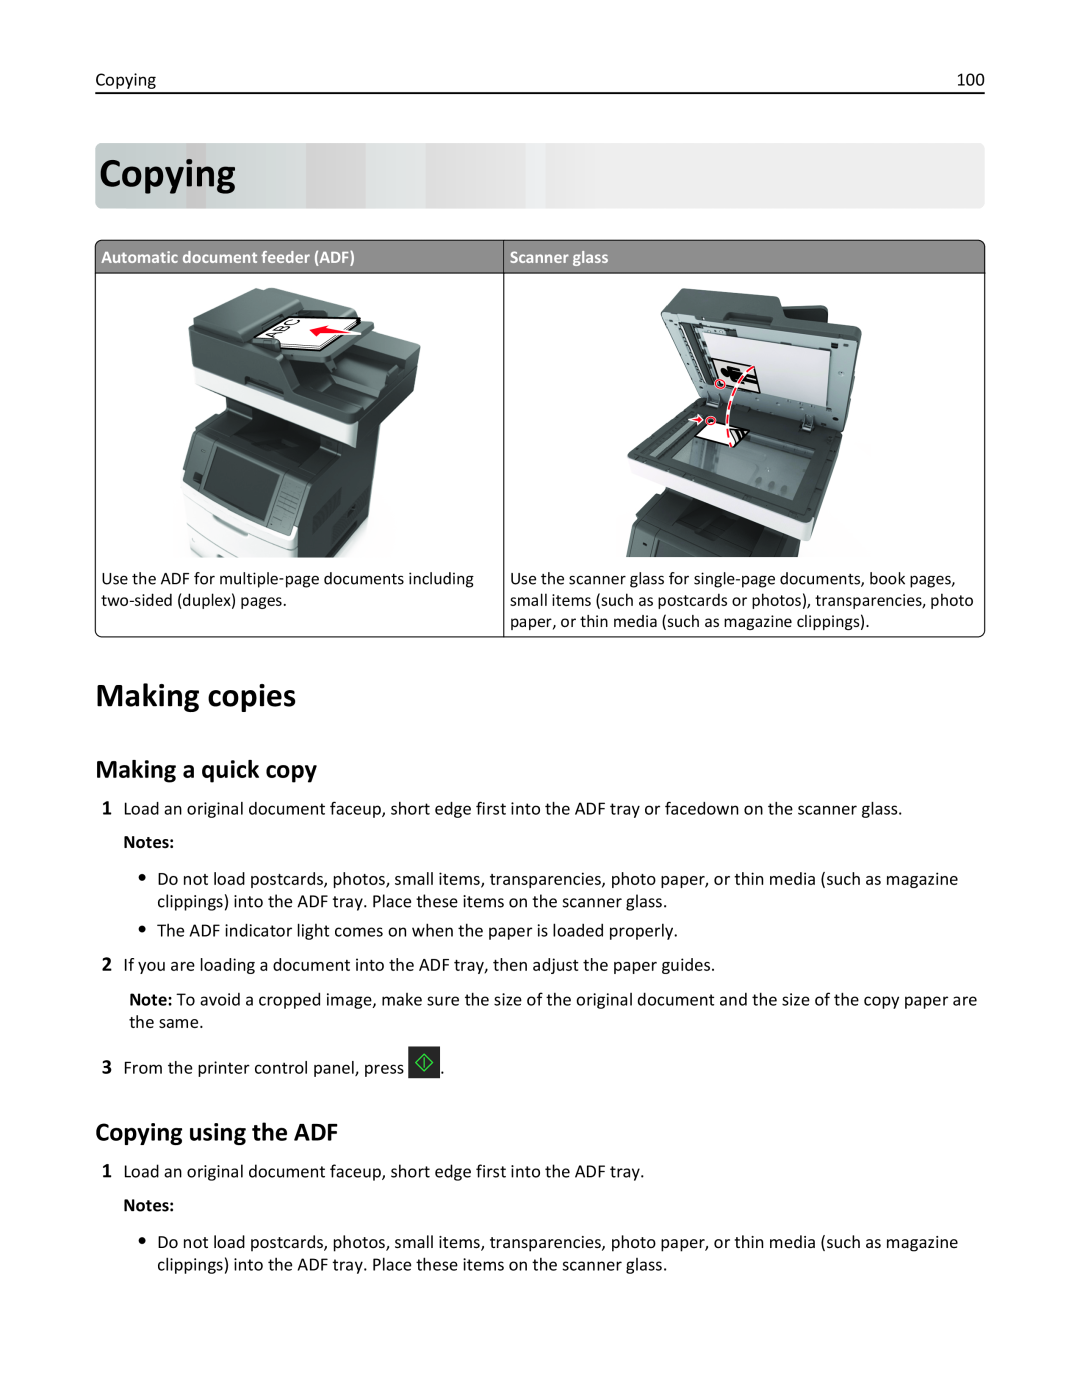 Lexmark MX710DHE, 24T7310, 237, 037 manual Making copies, Making a quick copy, Copying using the ADF 